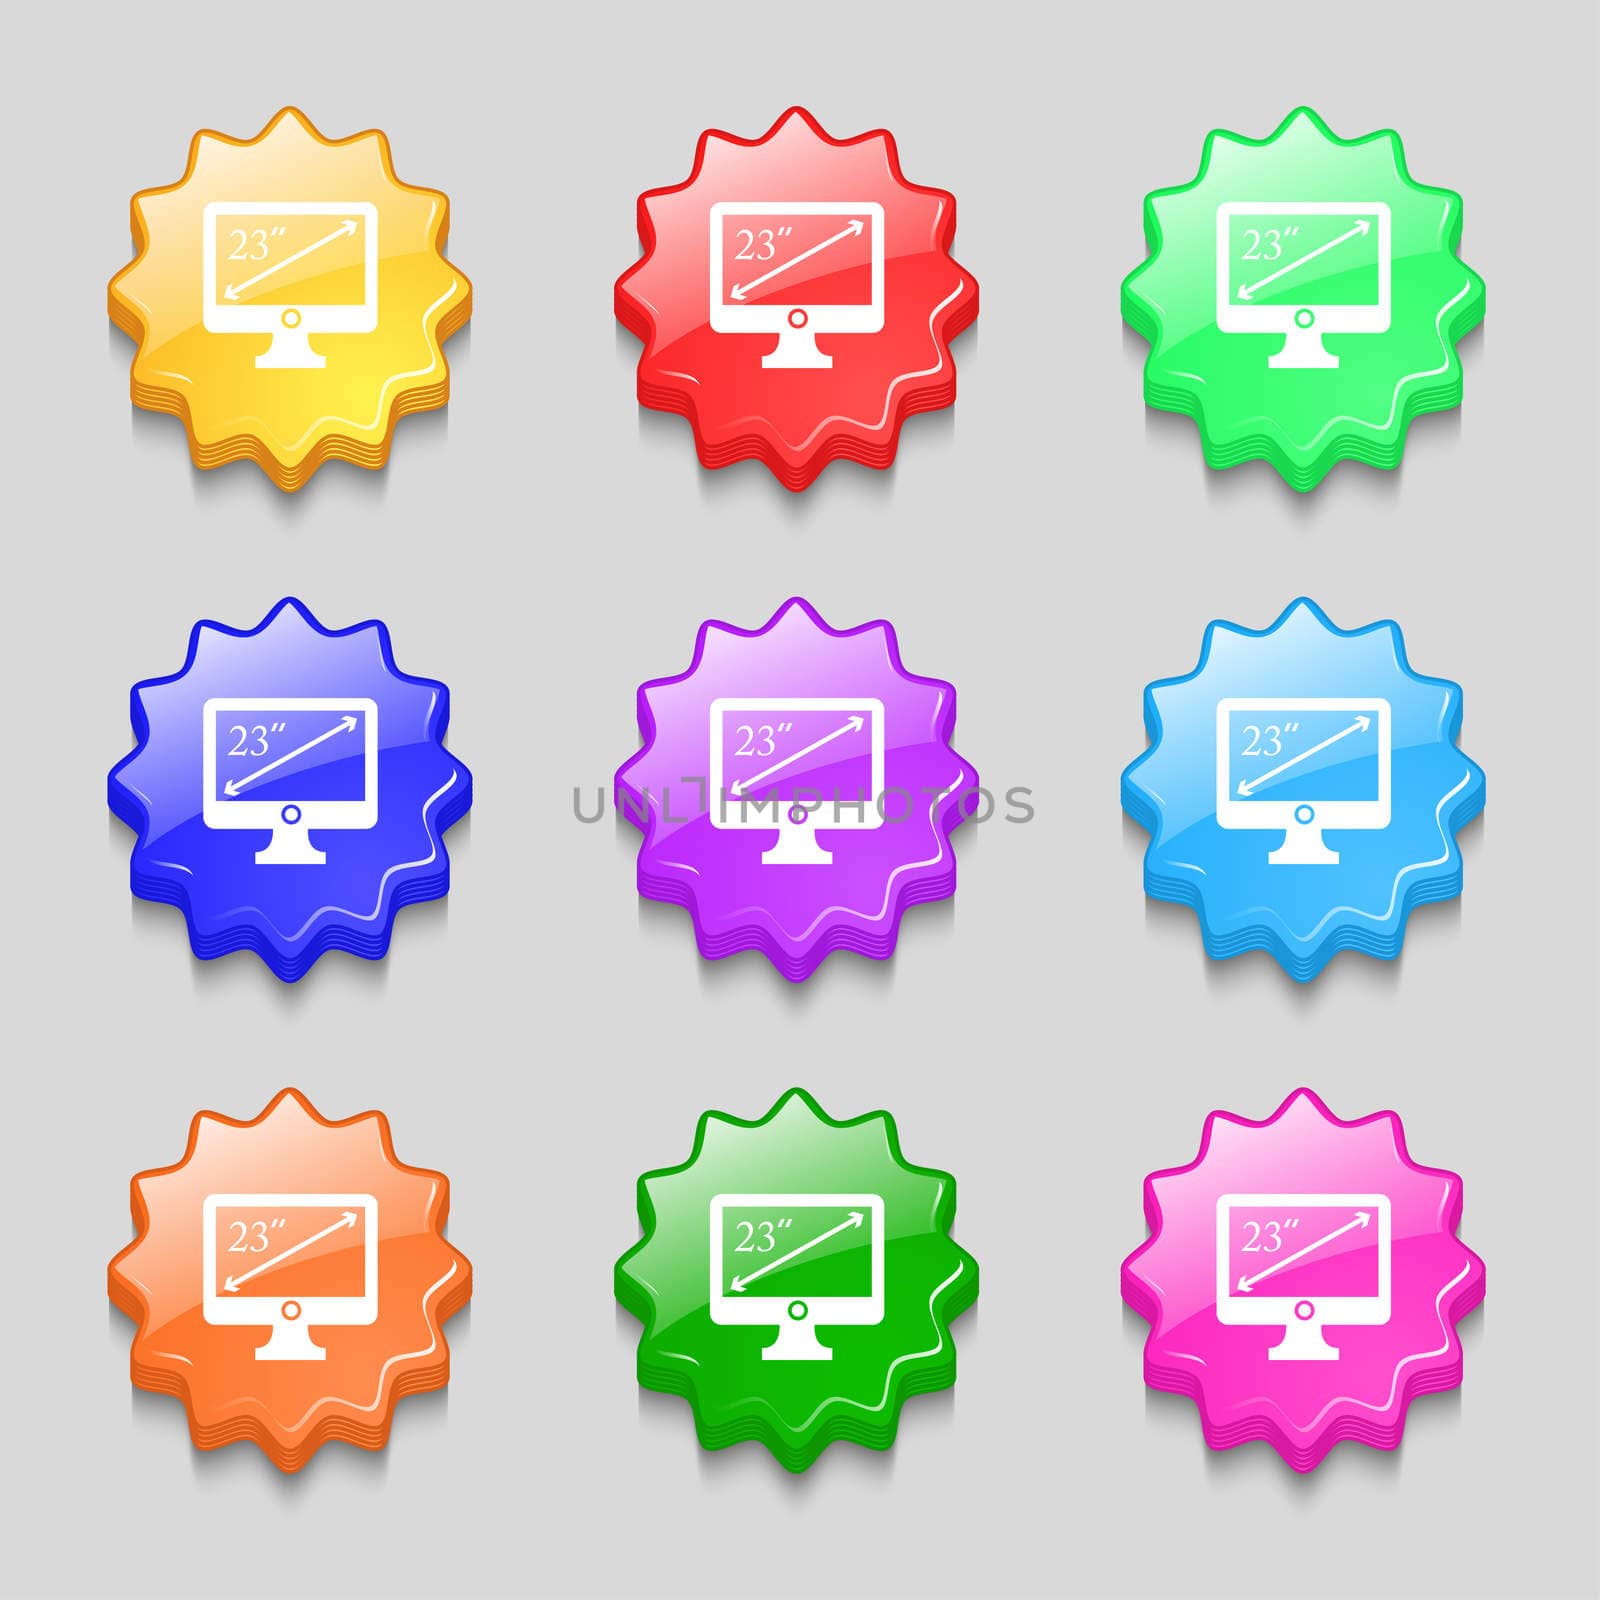 diagonal of the monitor 23 inches icon sign. symbol on nine wavy colourful buttons. illustration